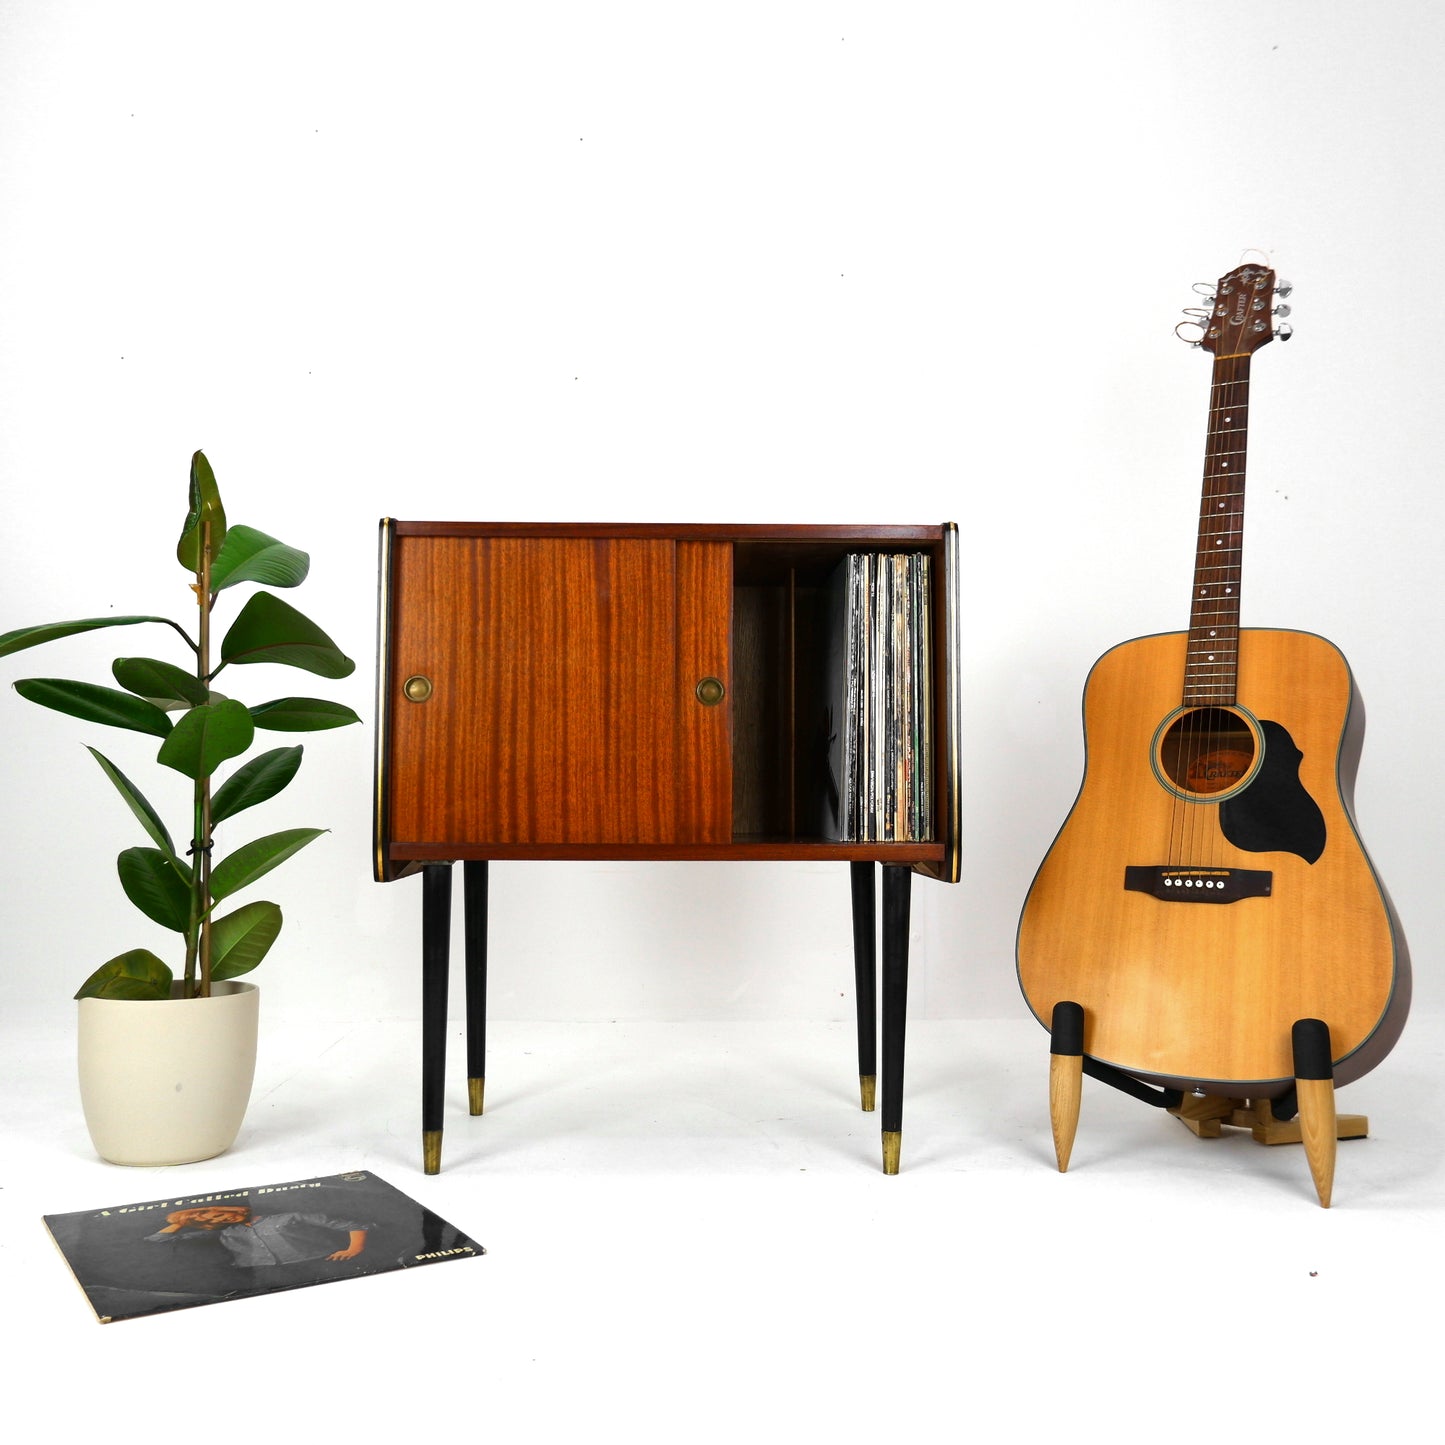 MCM 1950's "Homeworthy" Atomic RECORD CABINET - Free UK Delivery